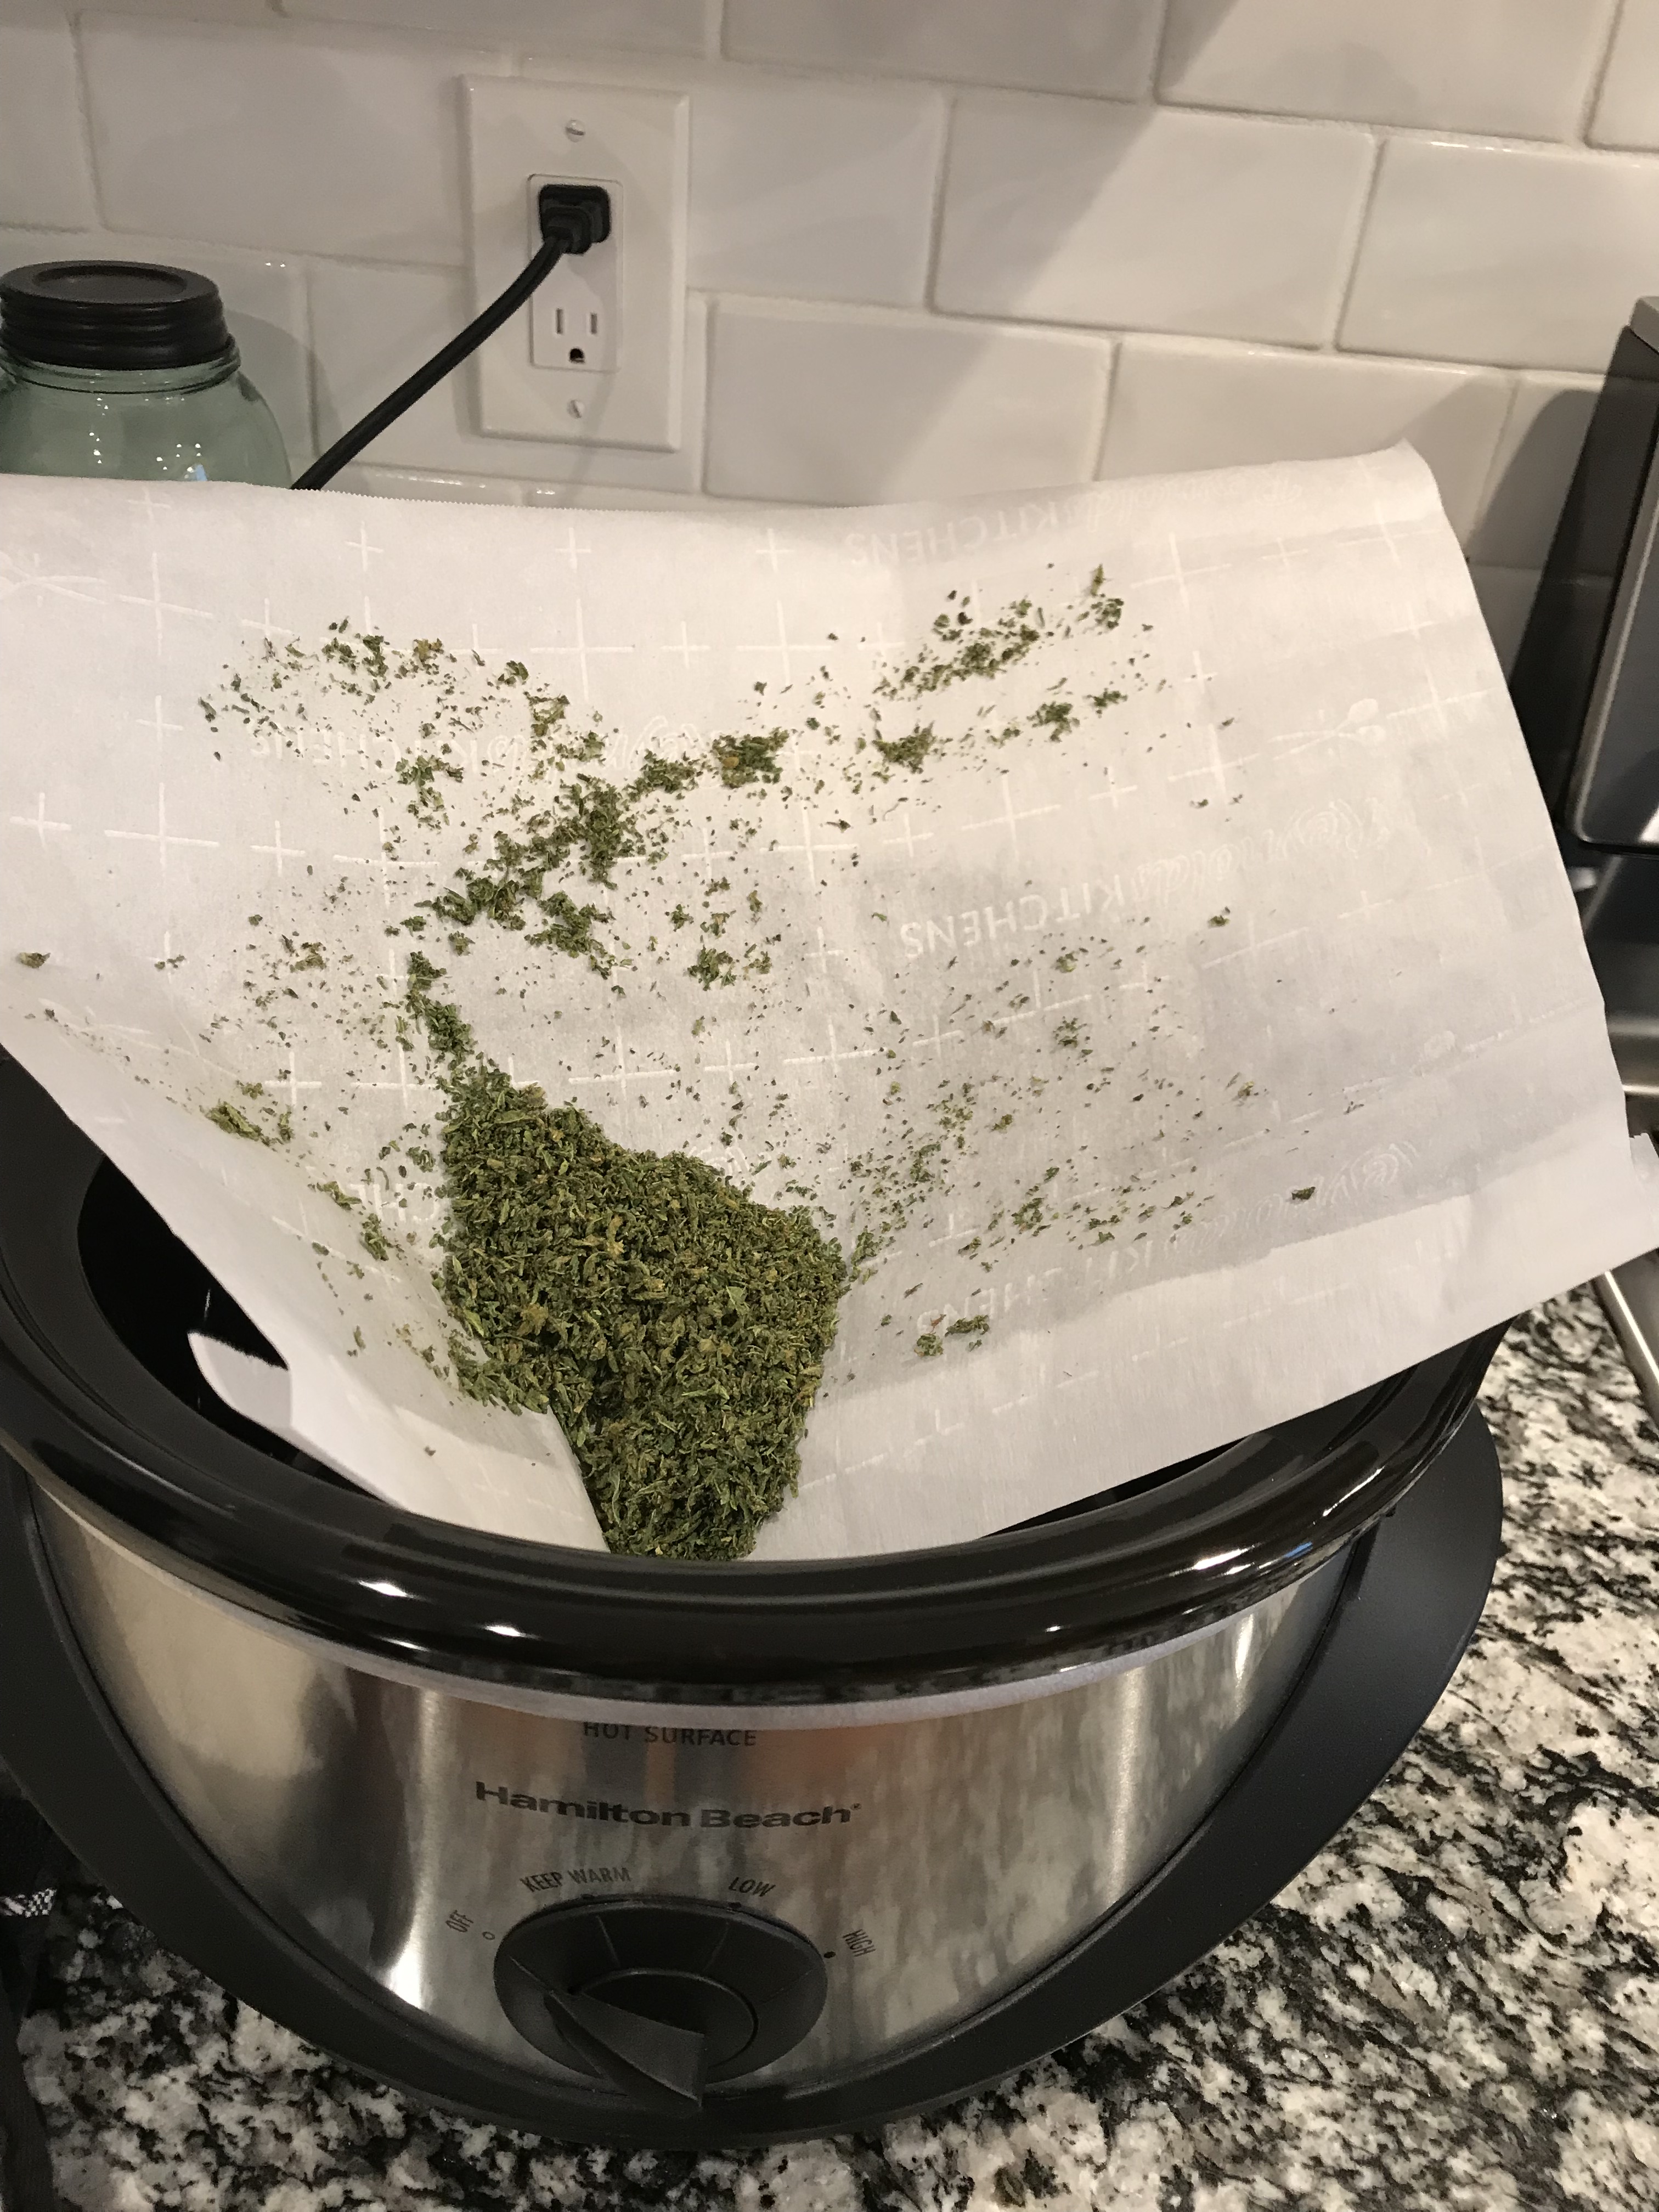 Easy does it! Gently pour all of the decarboxylated cannabis into the slow cooker, before you add the coconut oil.